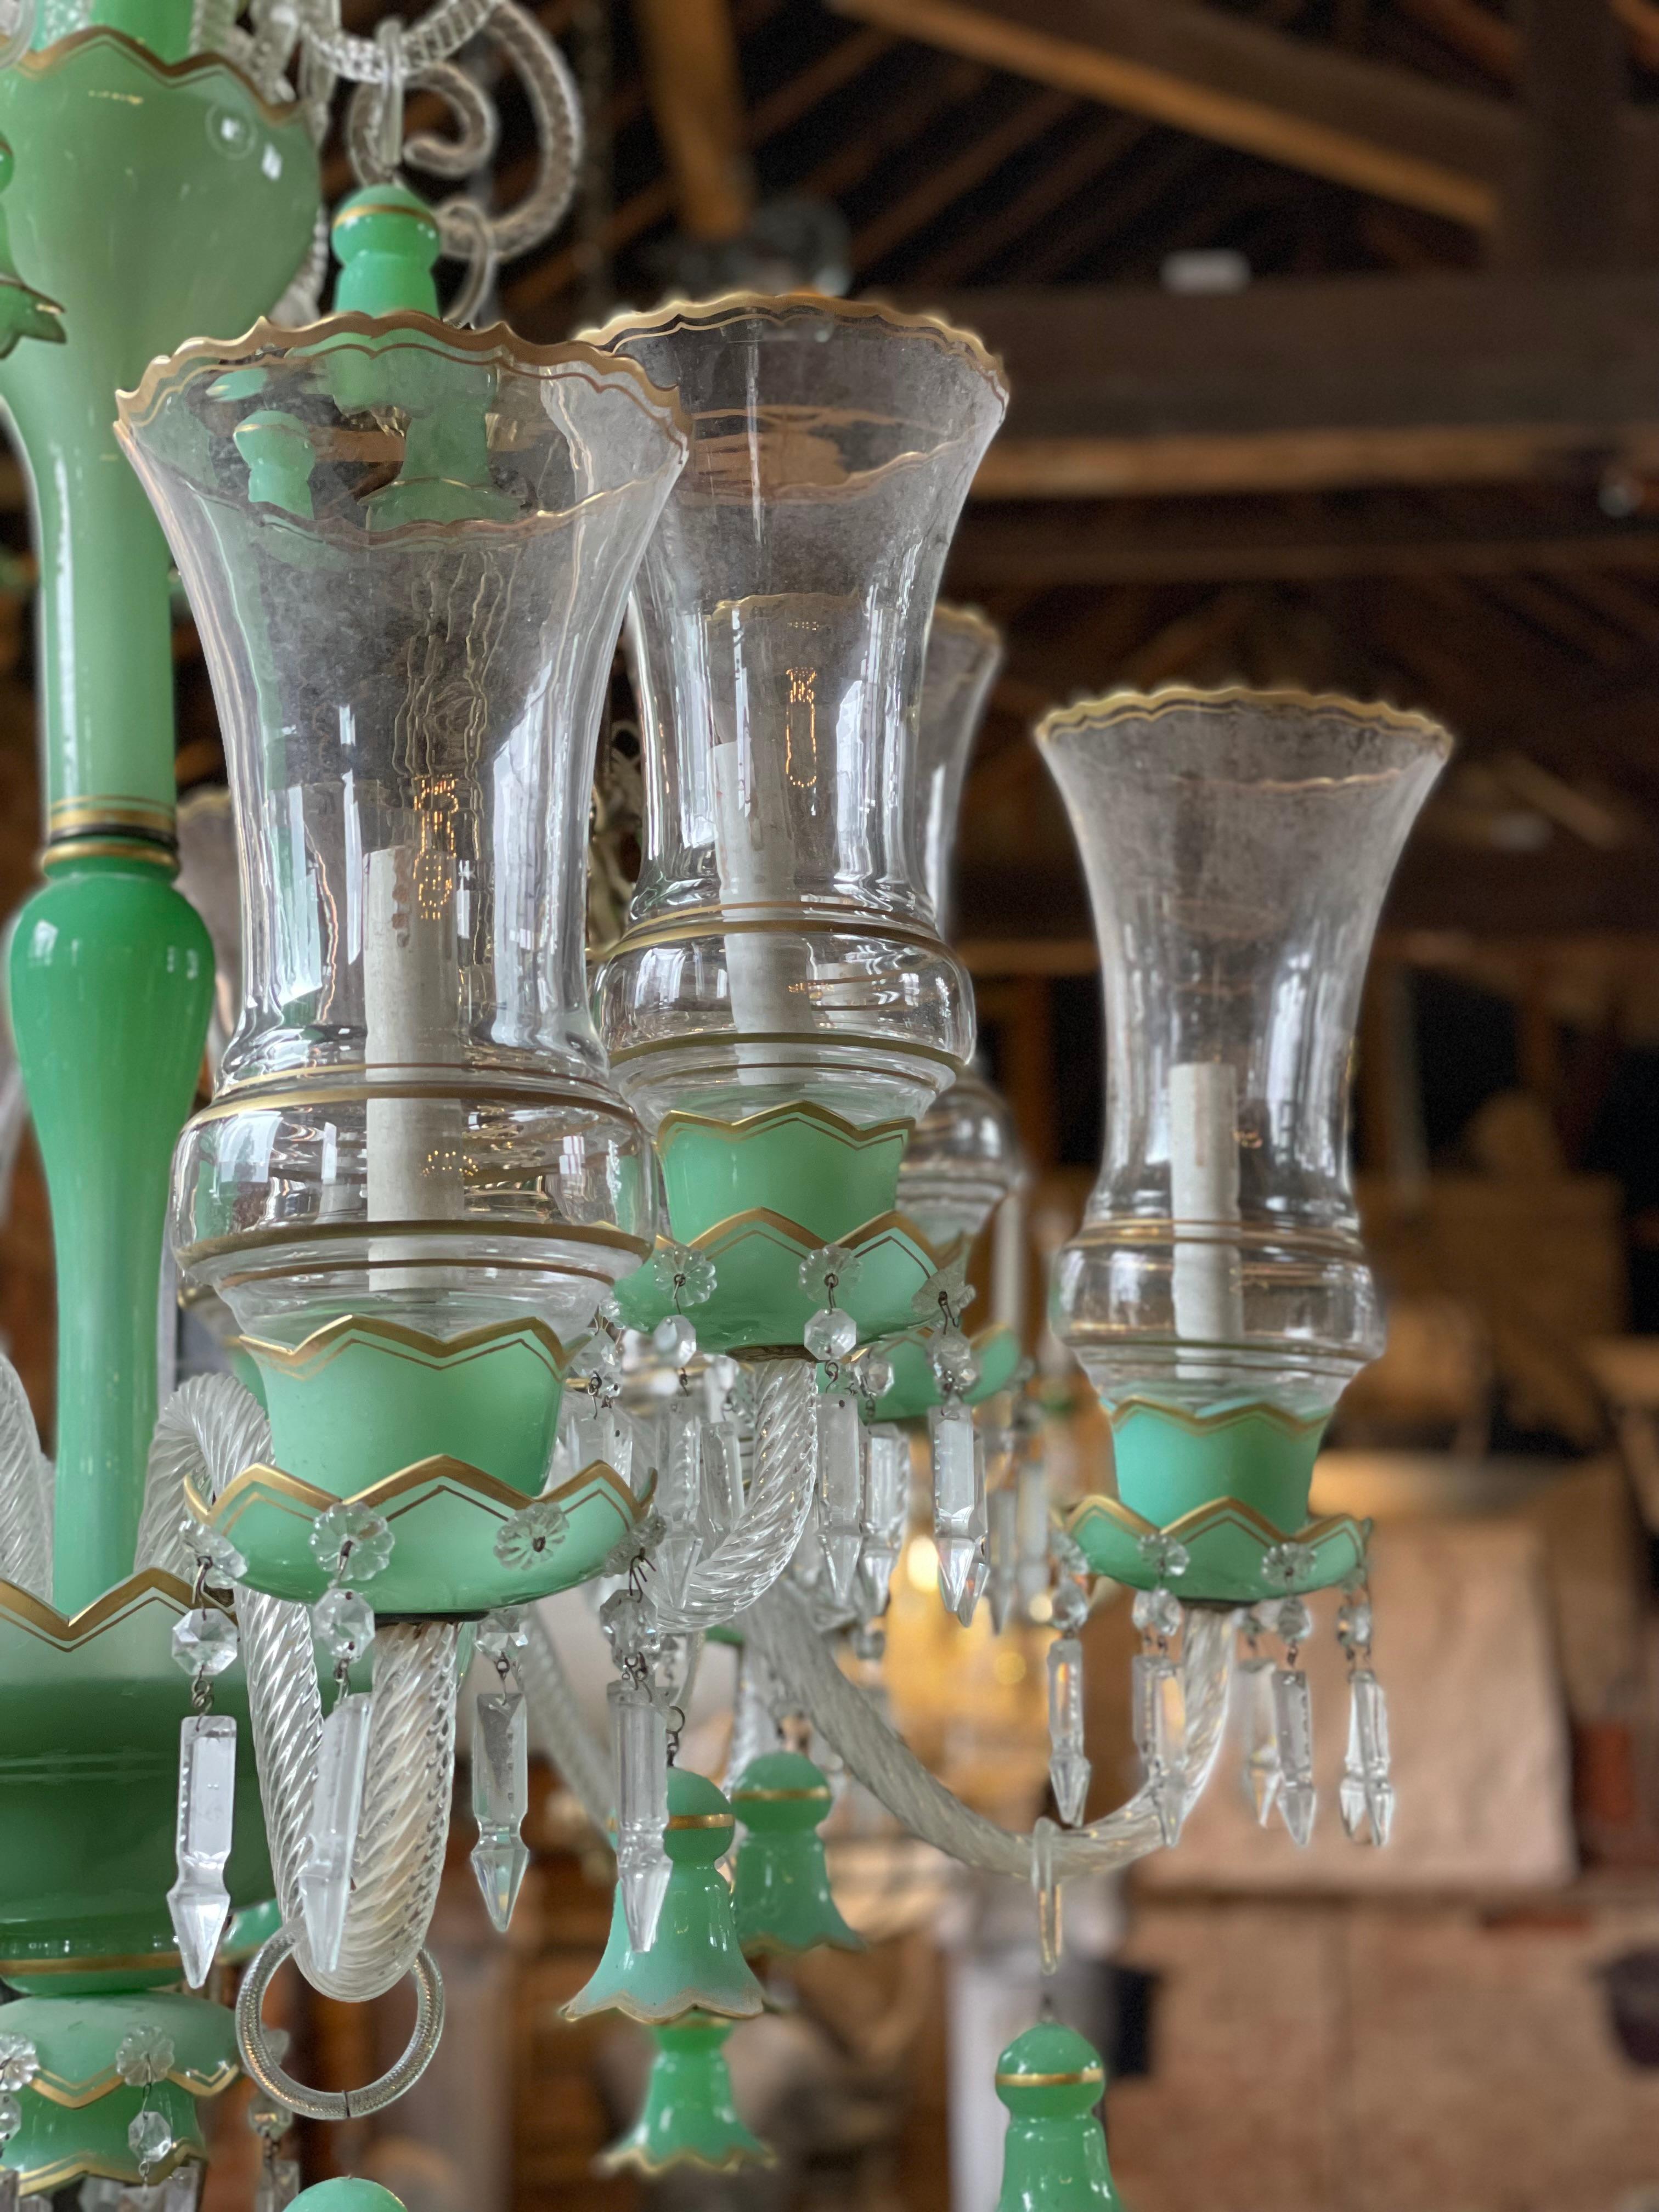 19th century Green Bohemian glass 12 arm chandelier.

This model is very popular with the middle eastern marketplace.